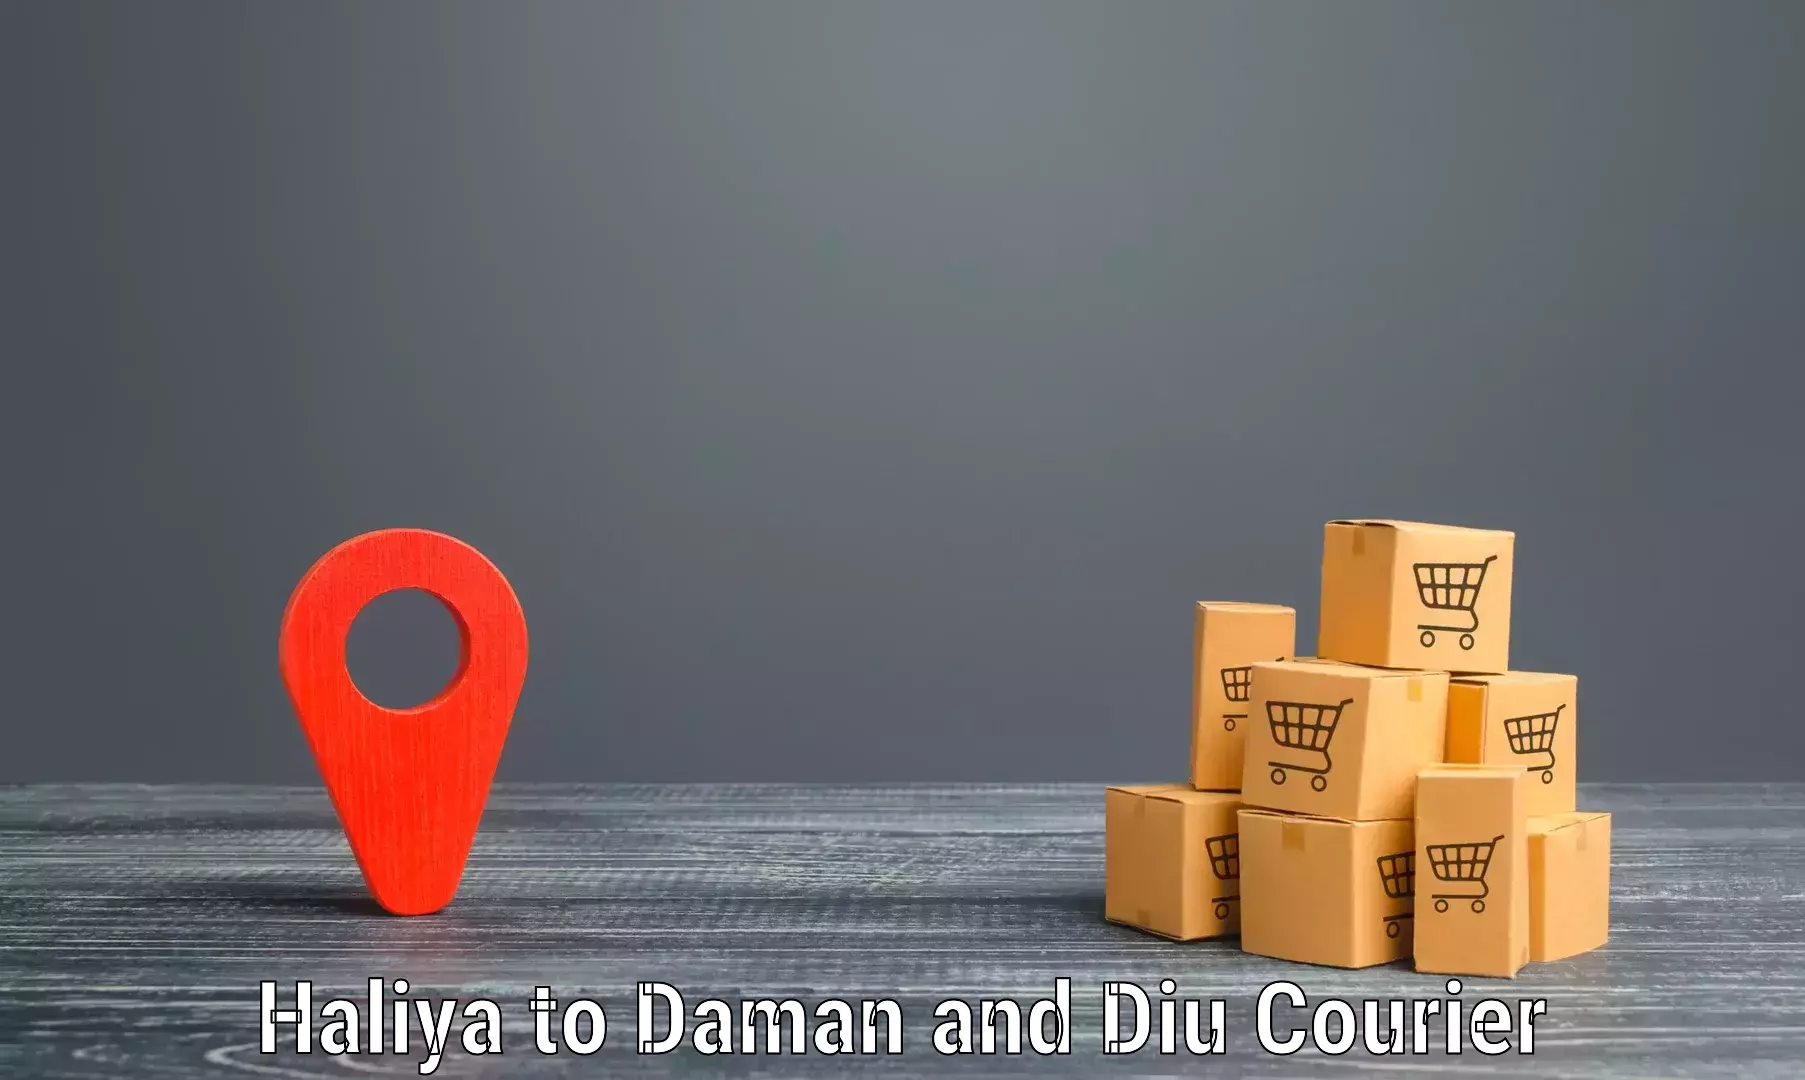 Cash on delivery service in Haliya to Diu